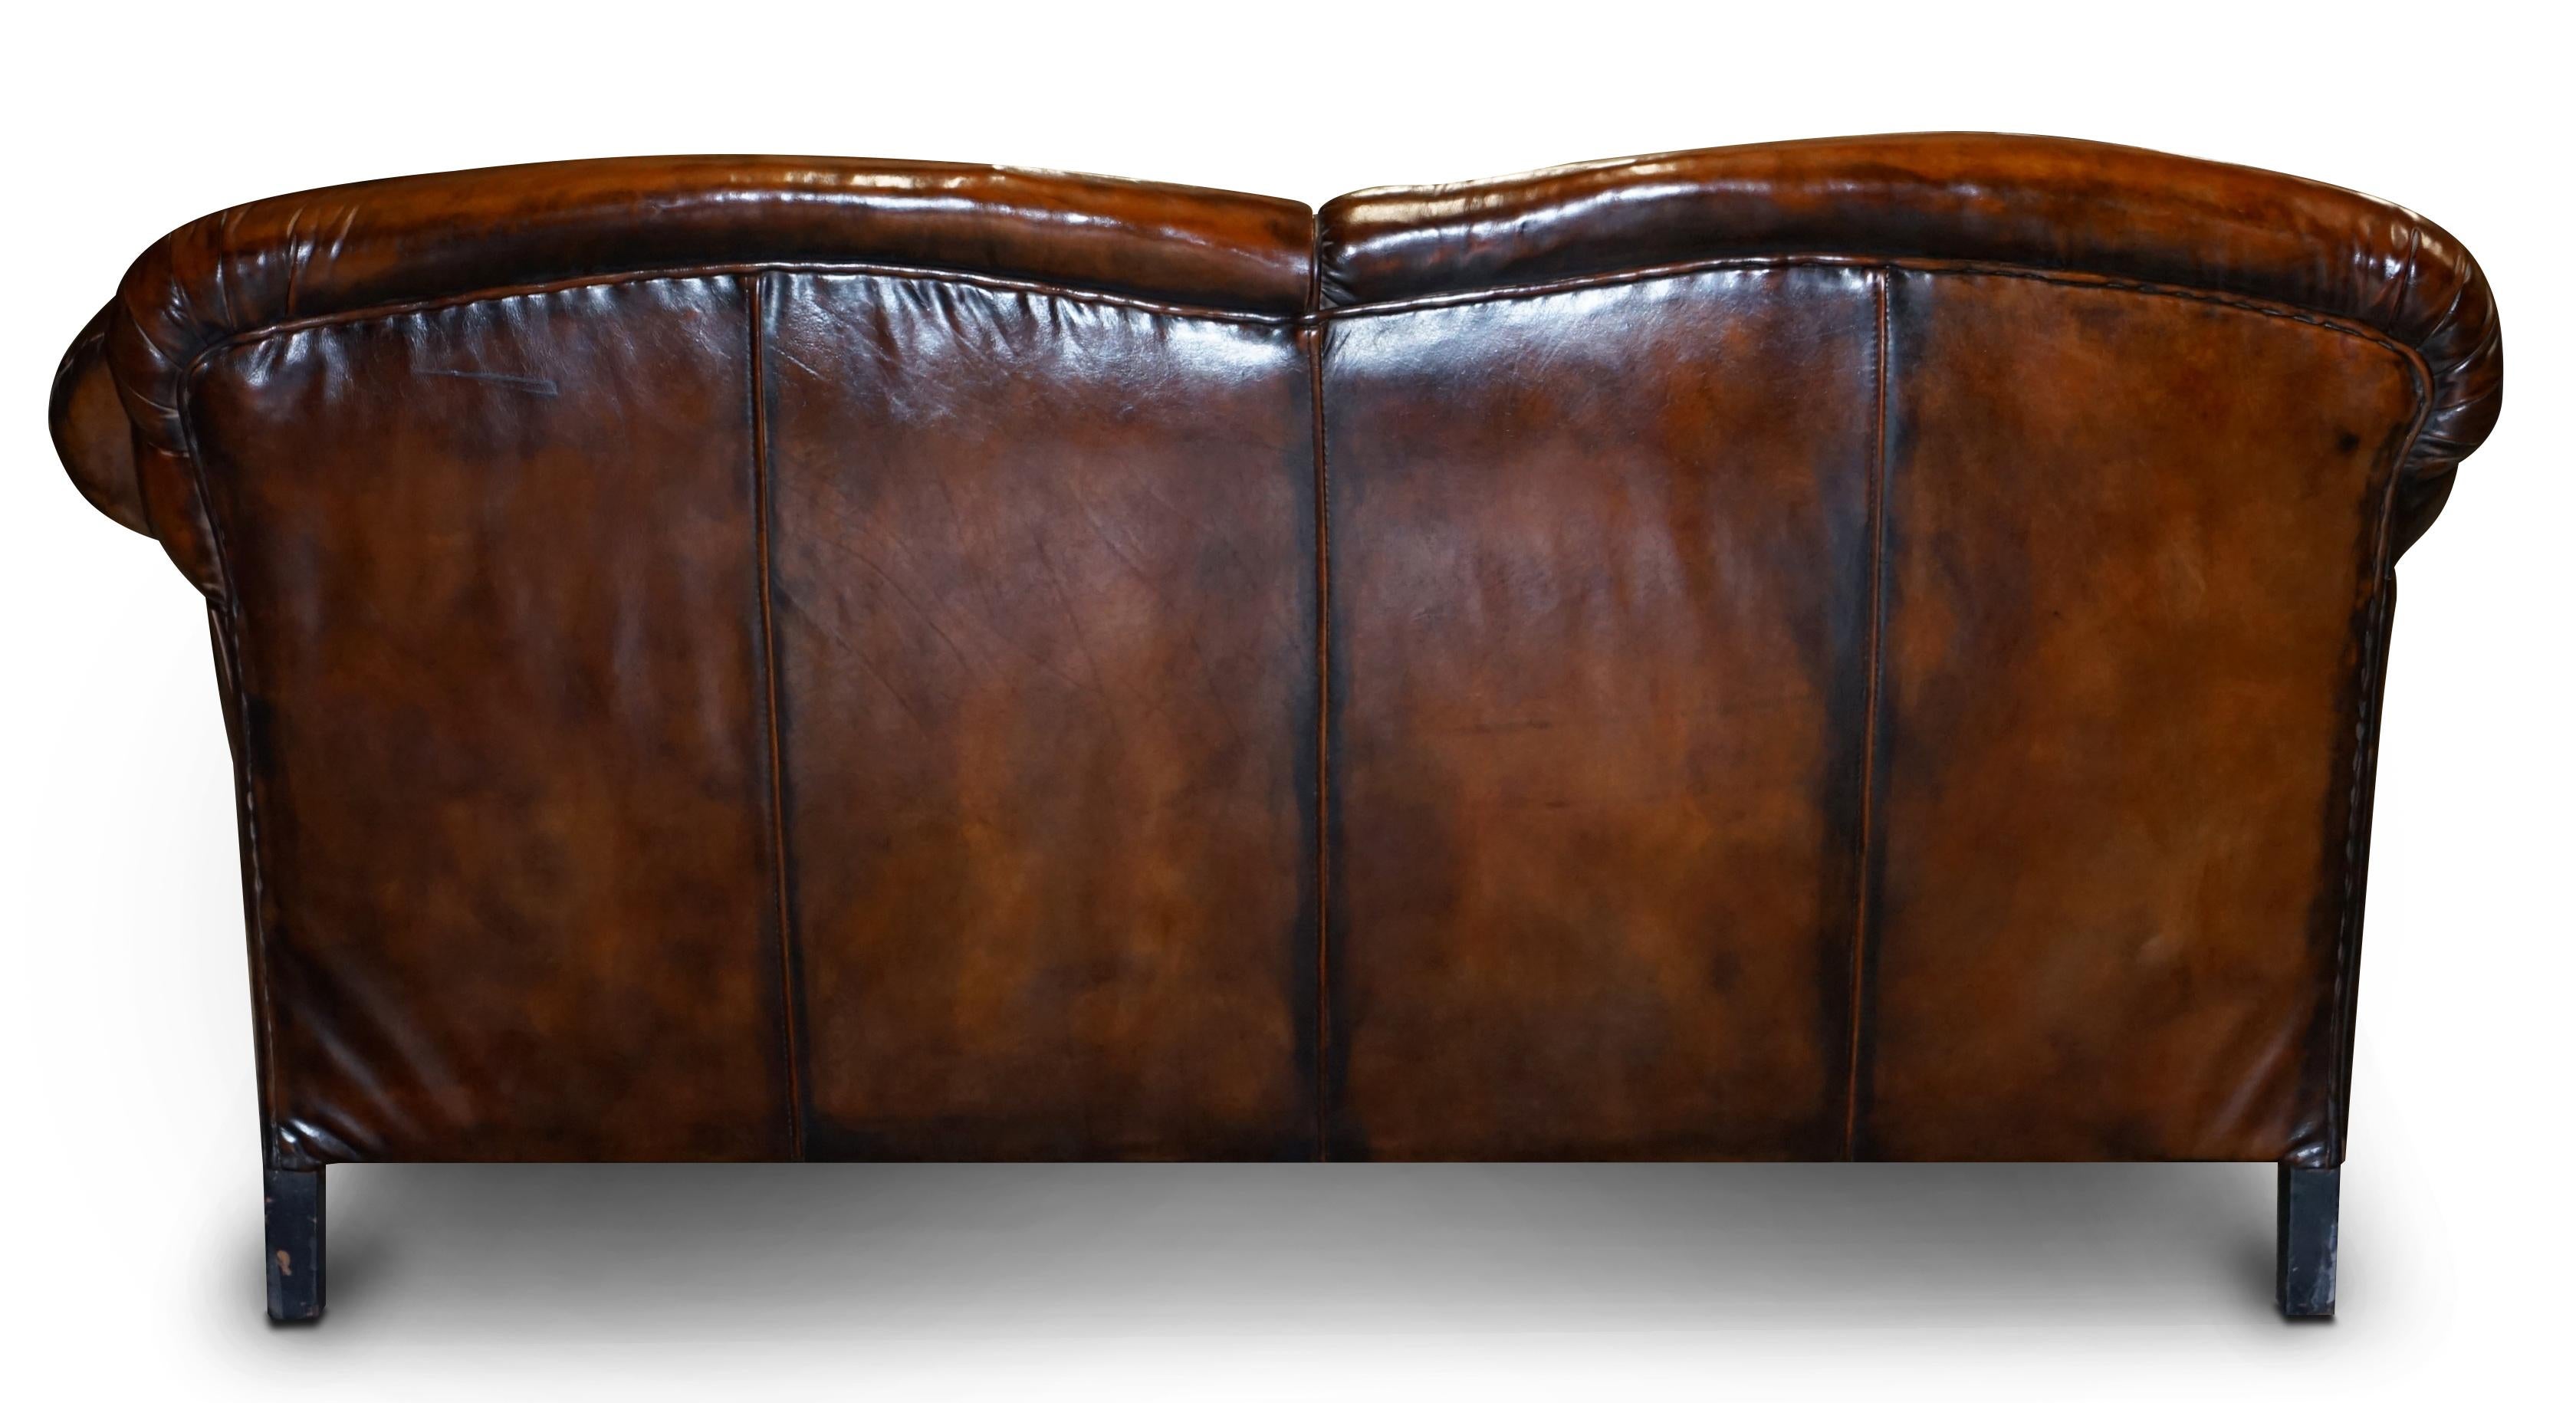 Fully Restored Whisky Brown Leather Drop Arm Chaise Lounge Sofa Horse Hair Fill For Sale 4